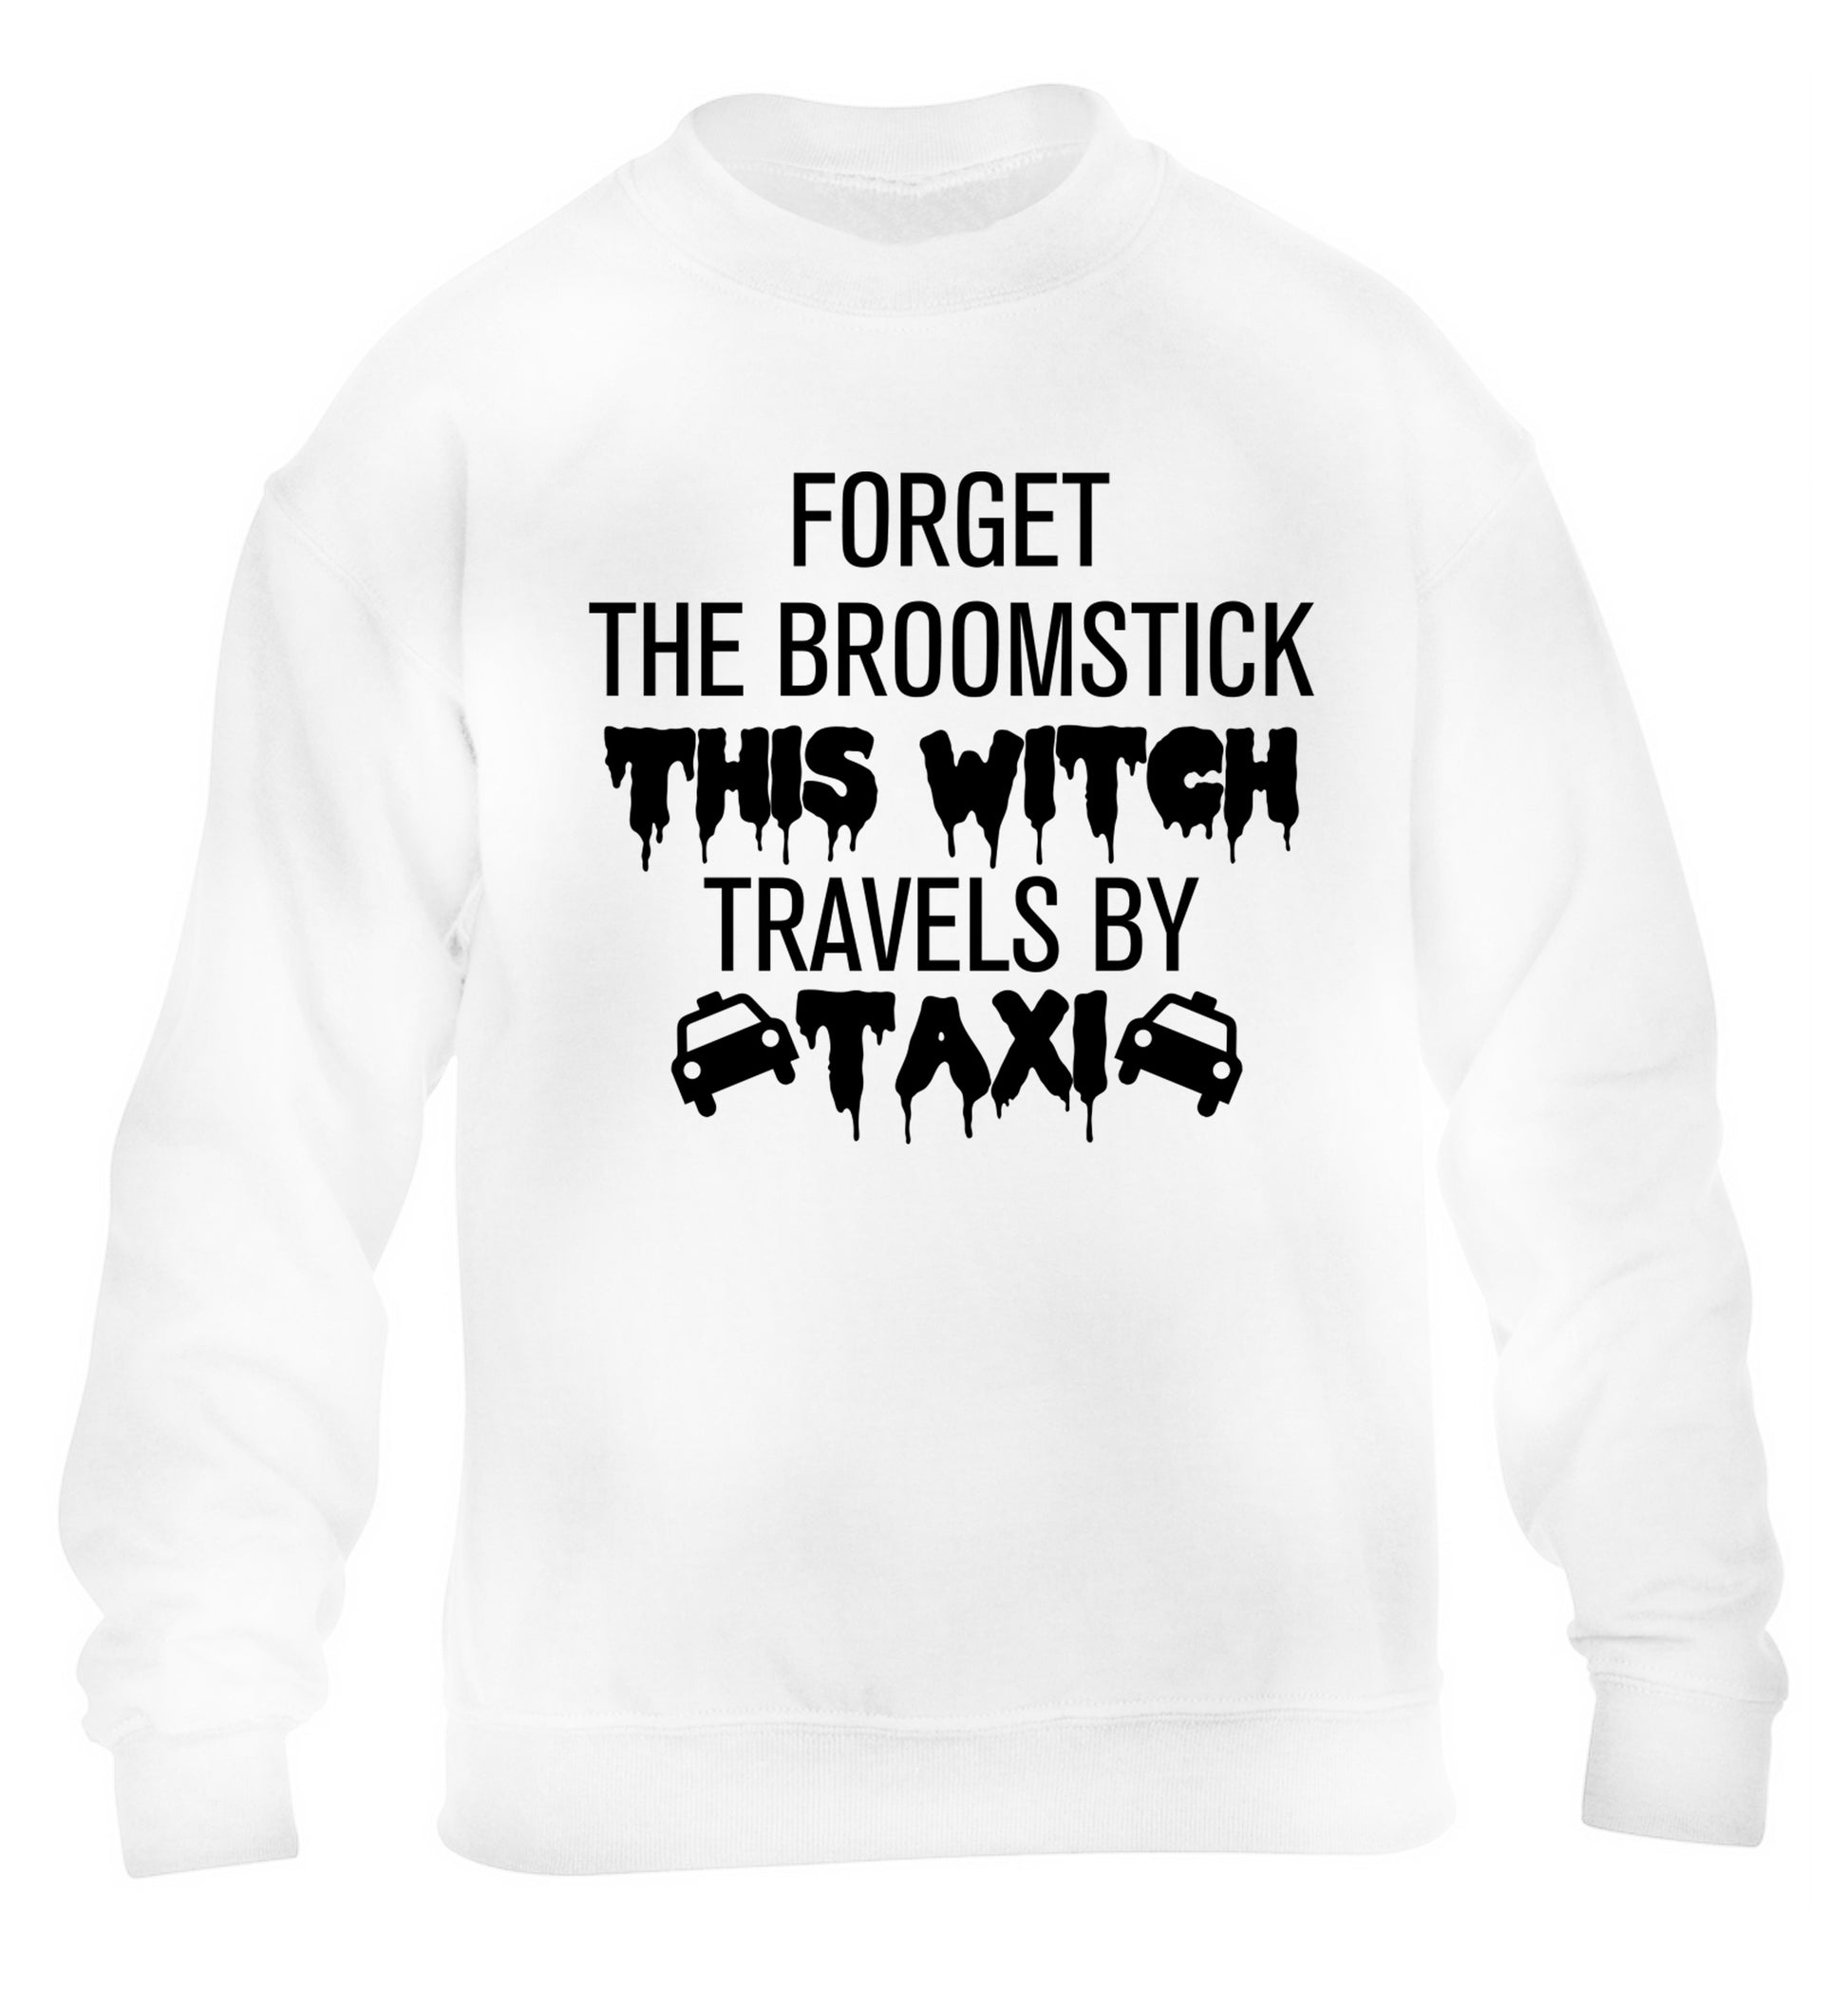 Forget the broomstick this witch travels by taxi children's white sweater 12-14 Years